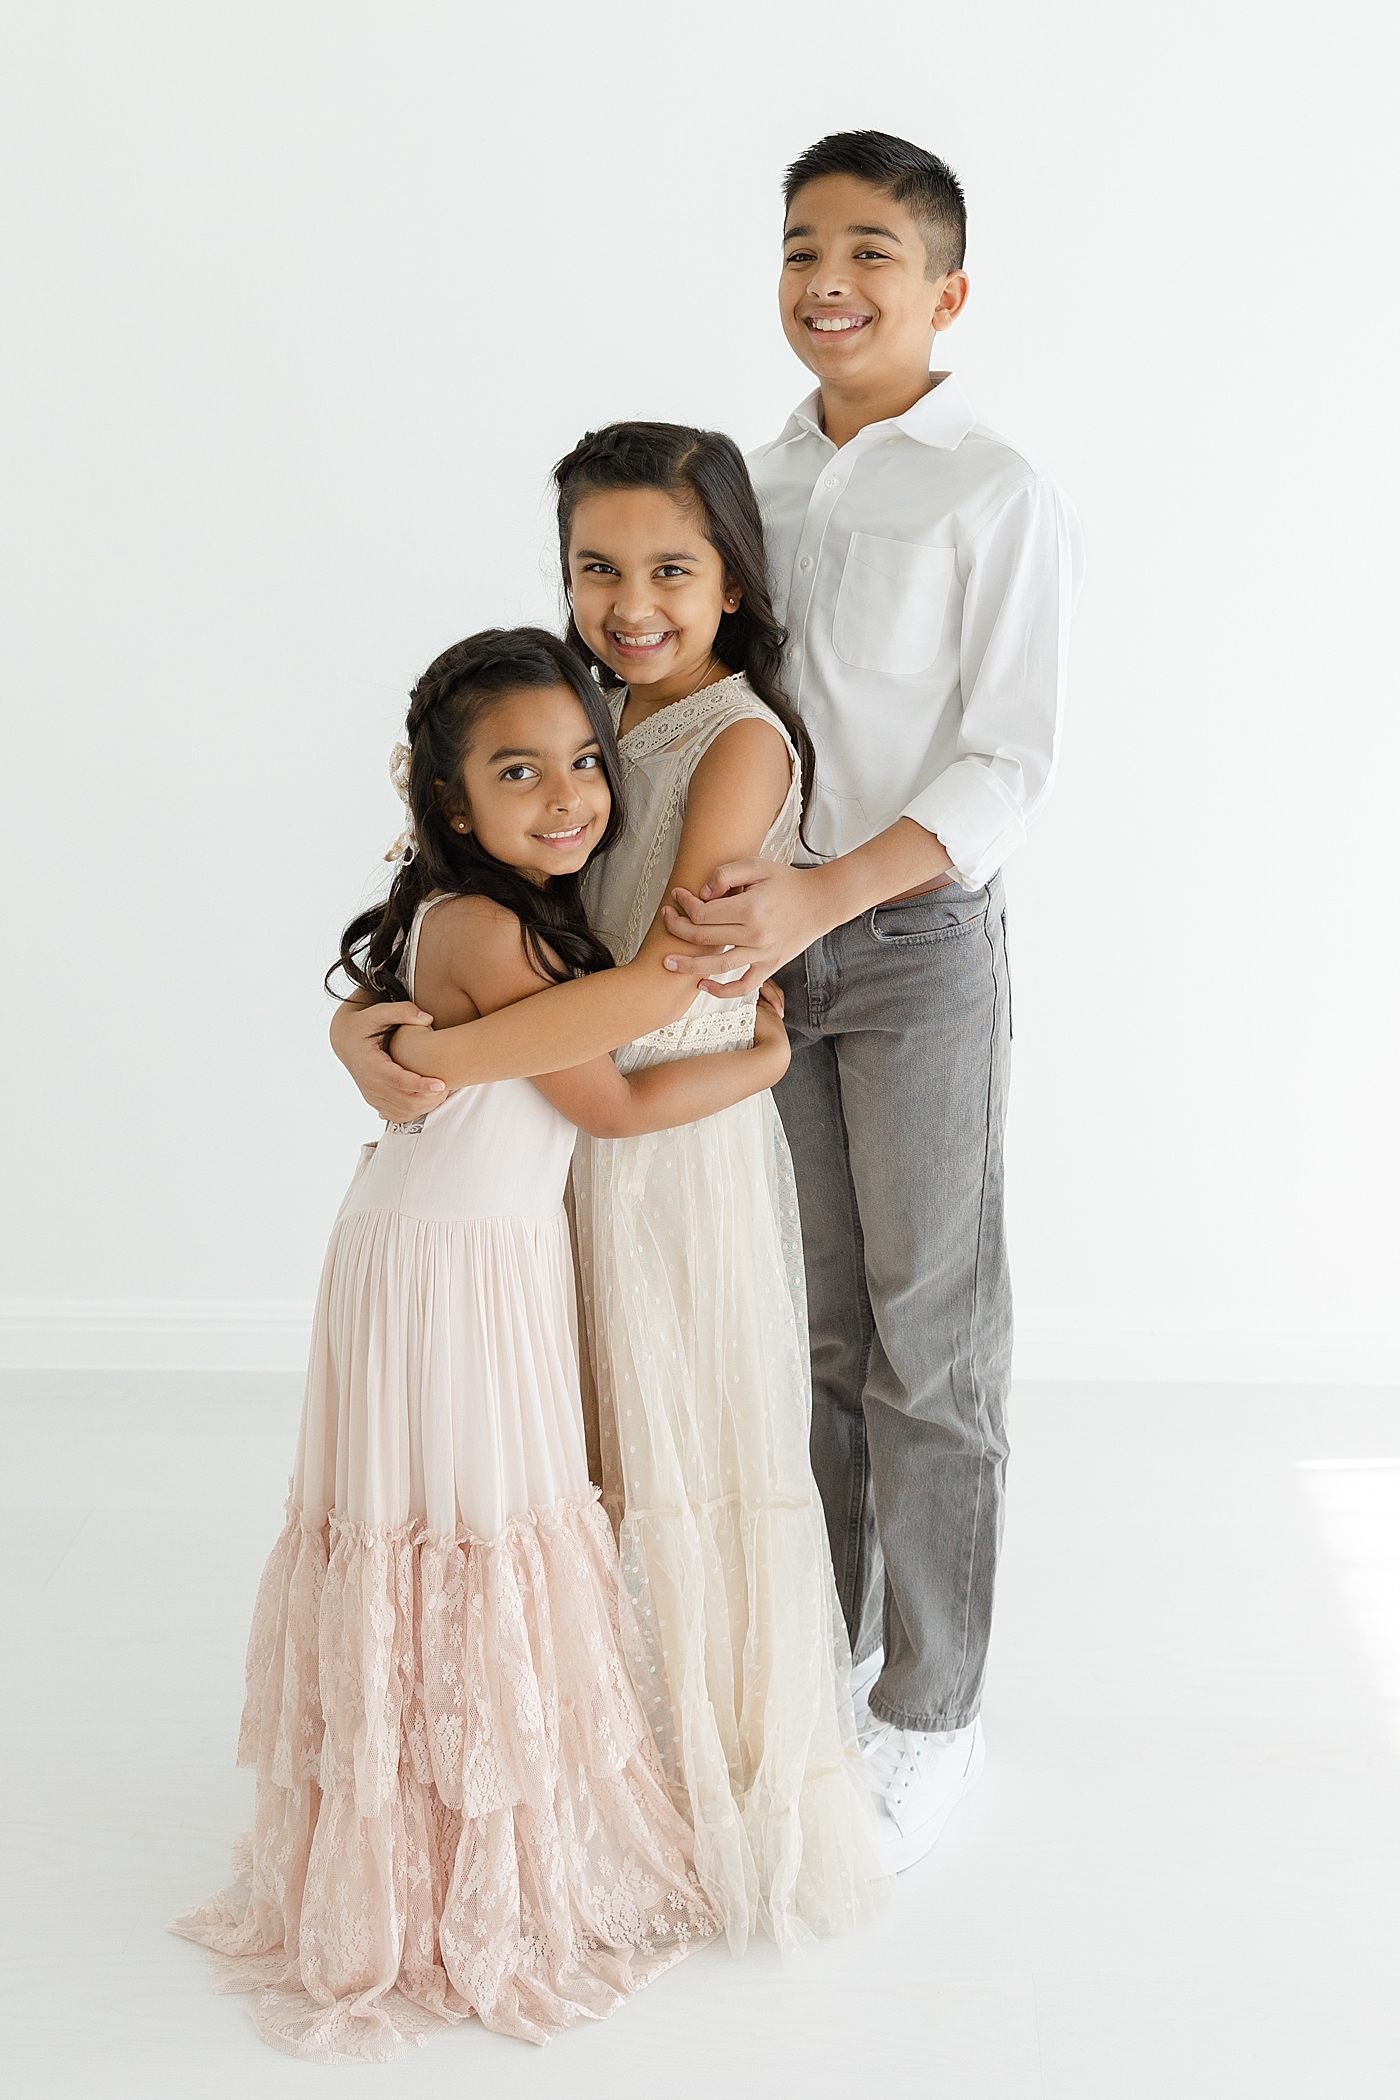 Three little kids hugging at the studio | Image by Sana Ahmed Photography